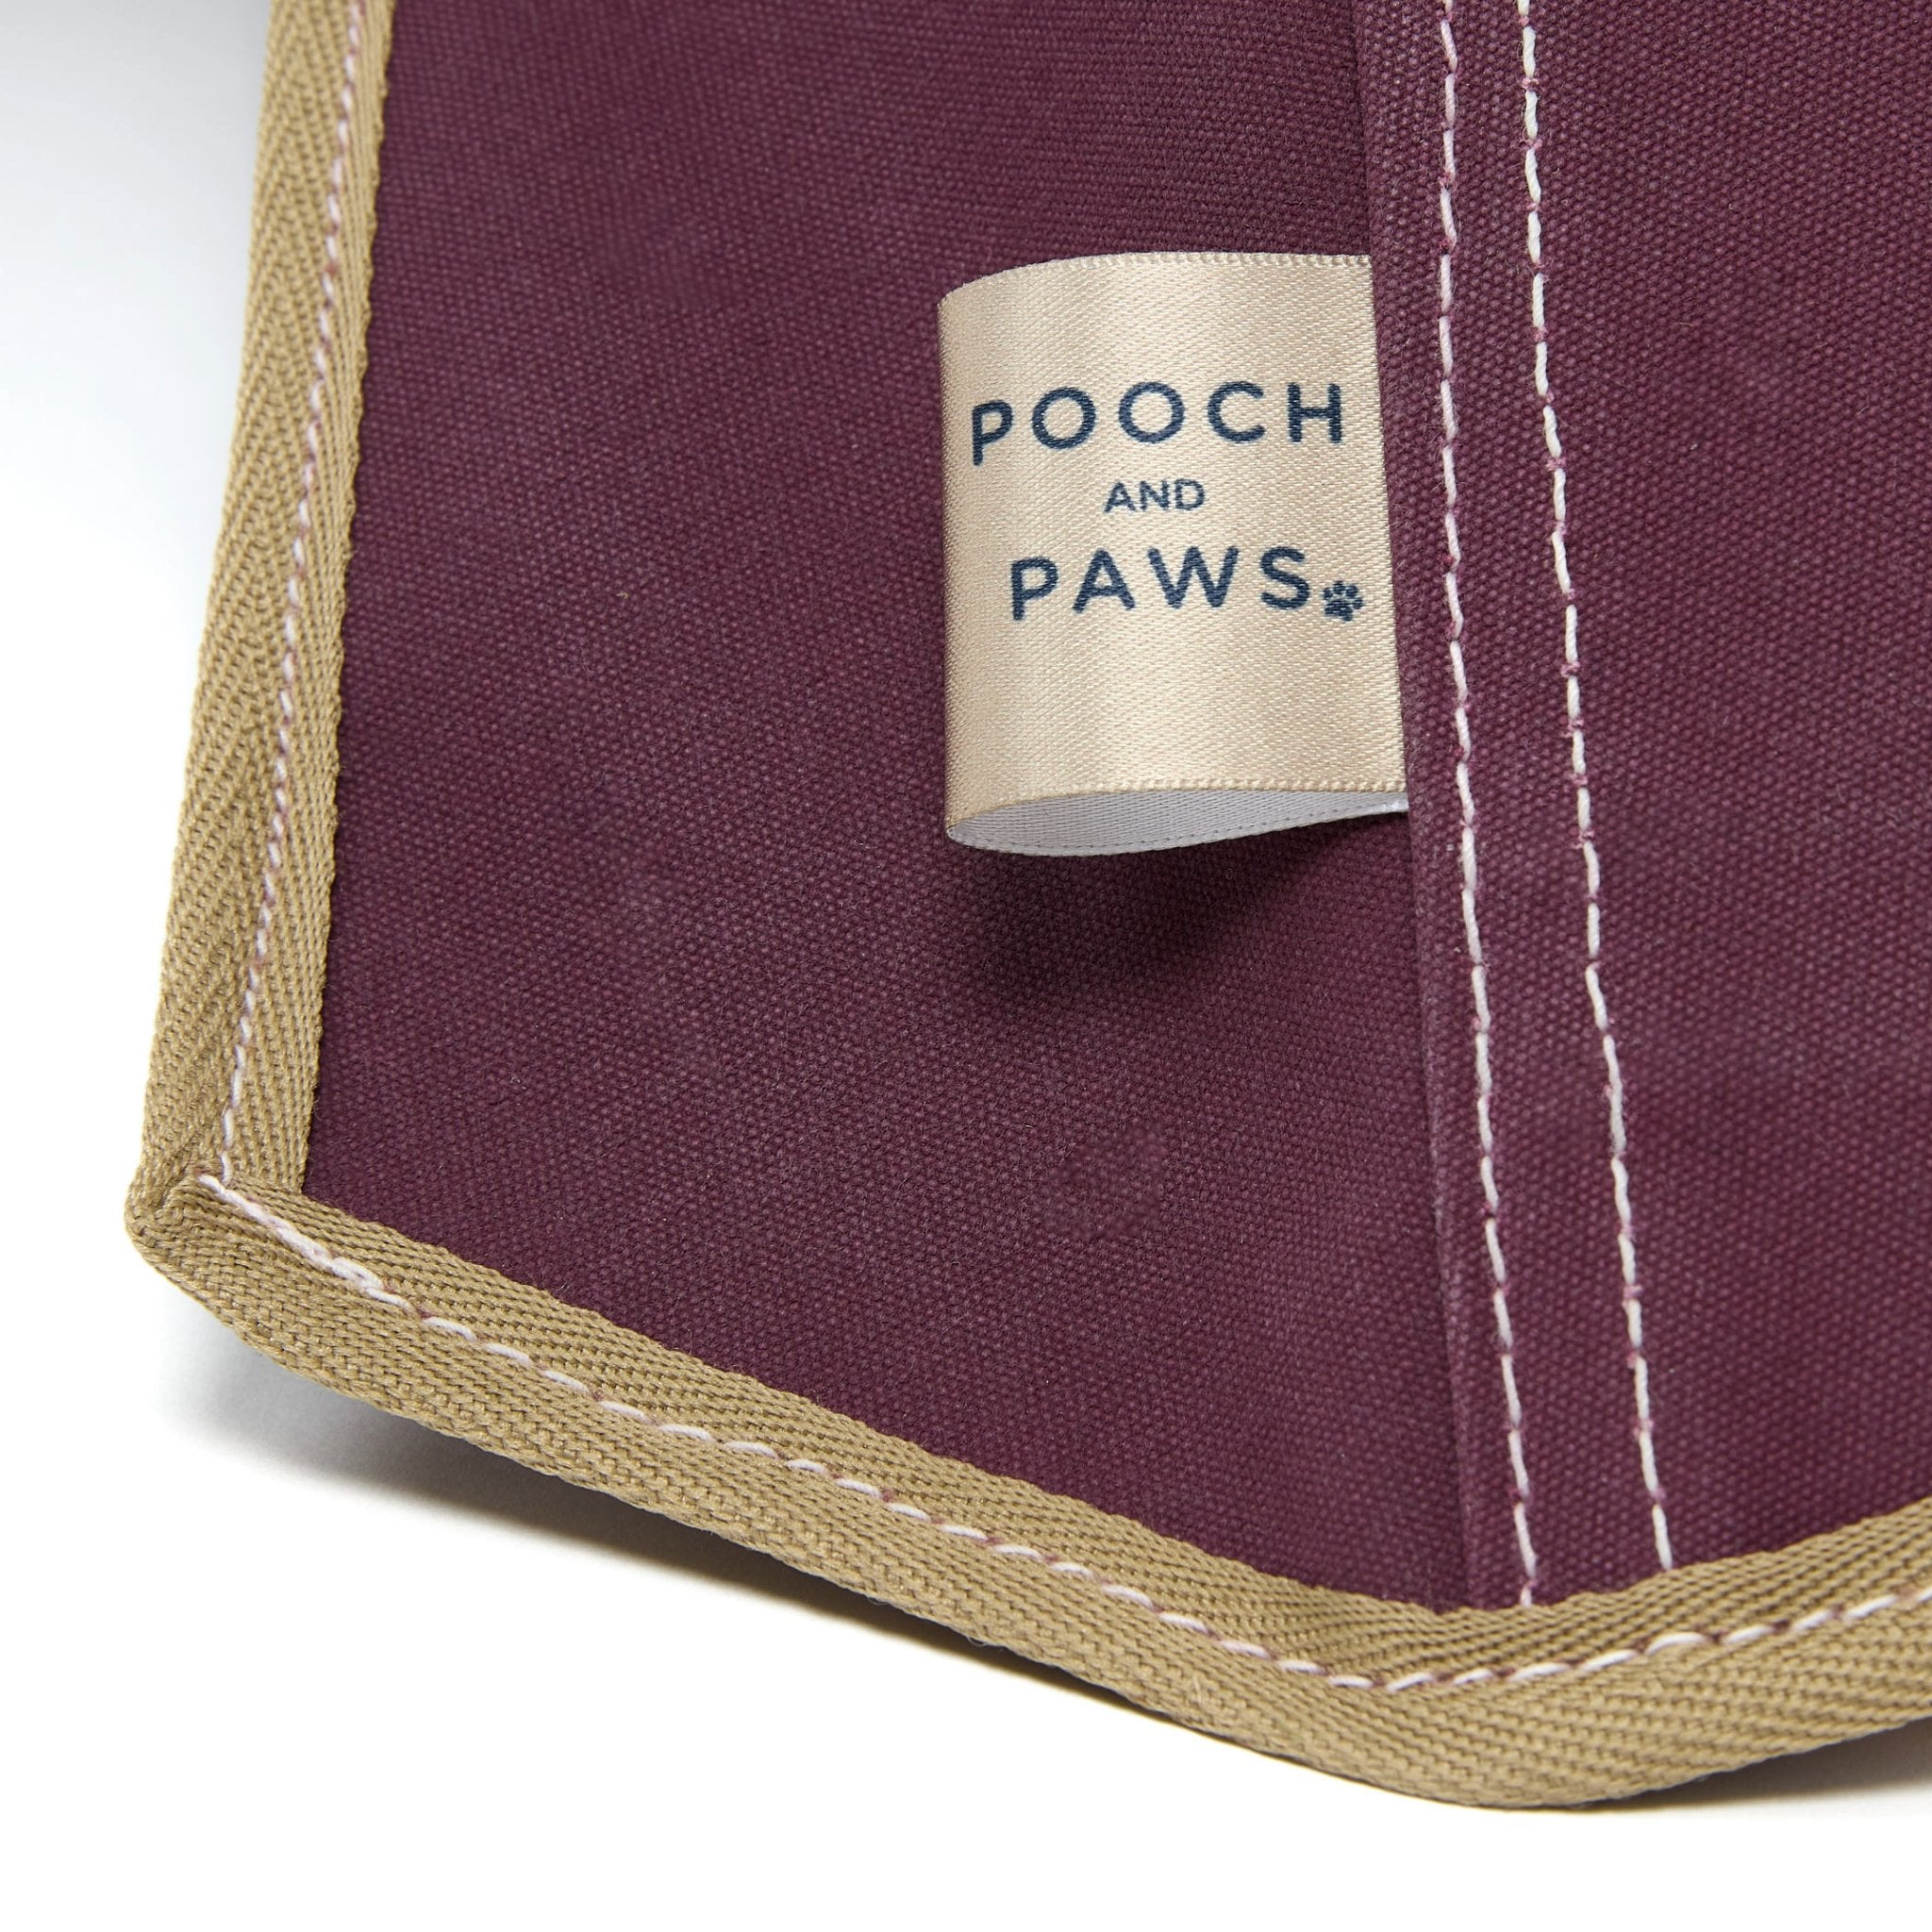 Dog bed. Dog teepee bed in burgundy with Pooch and Paws label